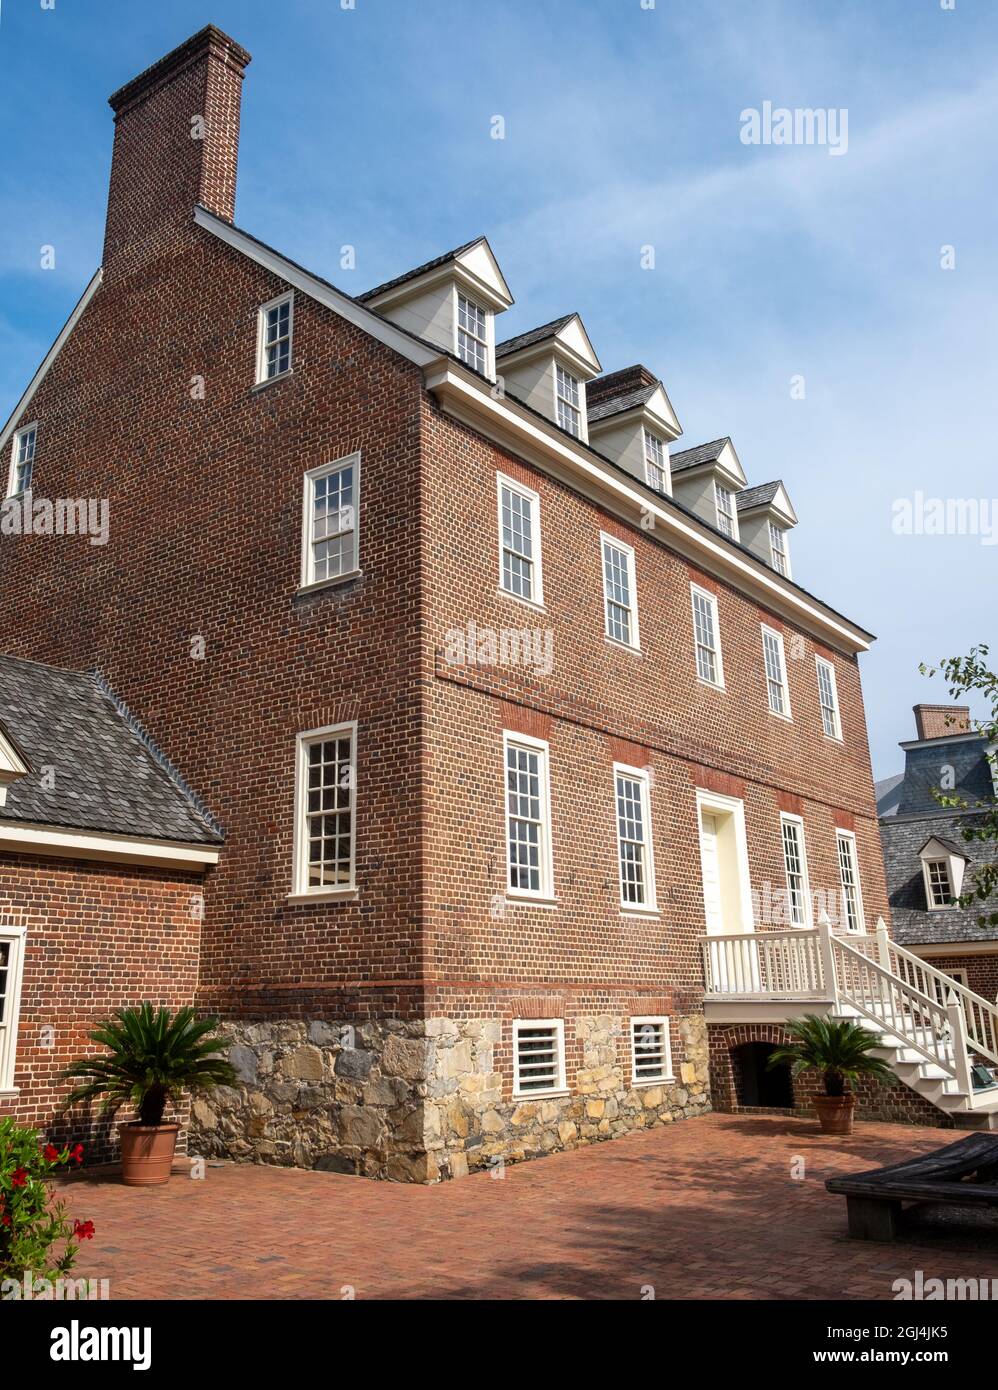 The William Paca House in Annapolis, Maryland, United States. Stock Photo